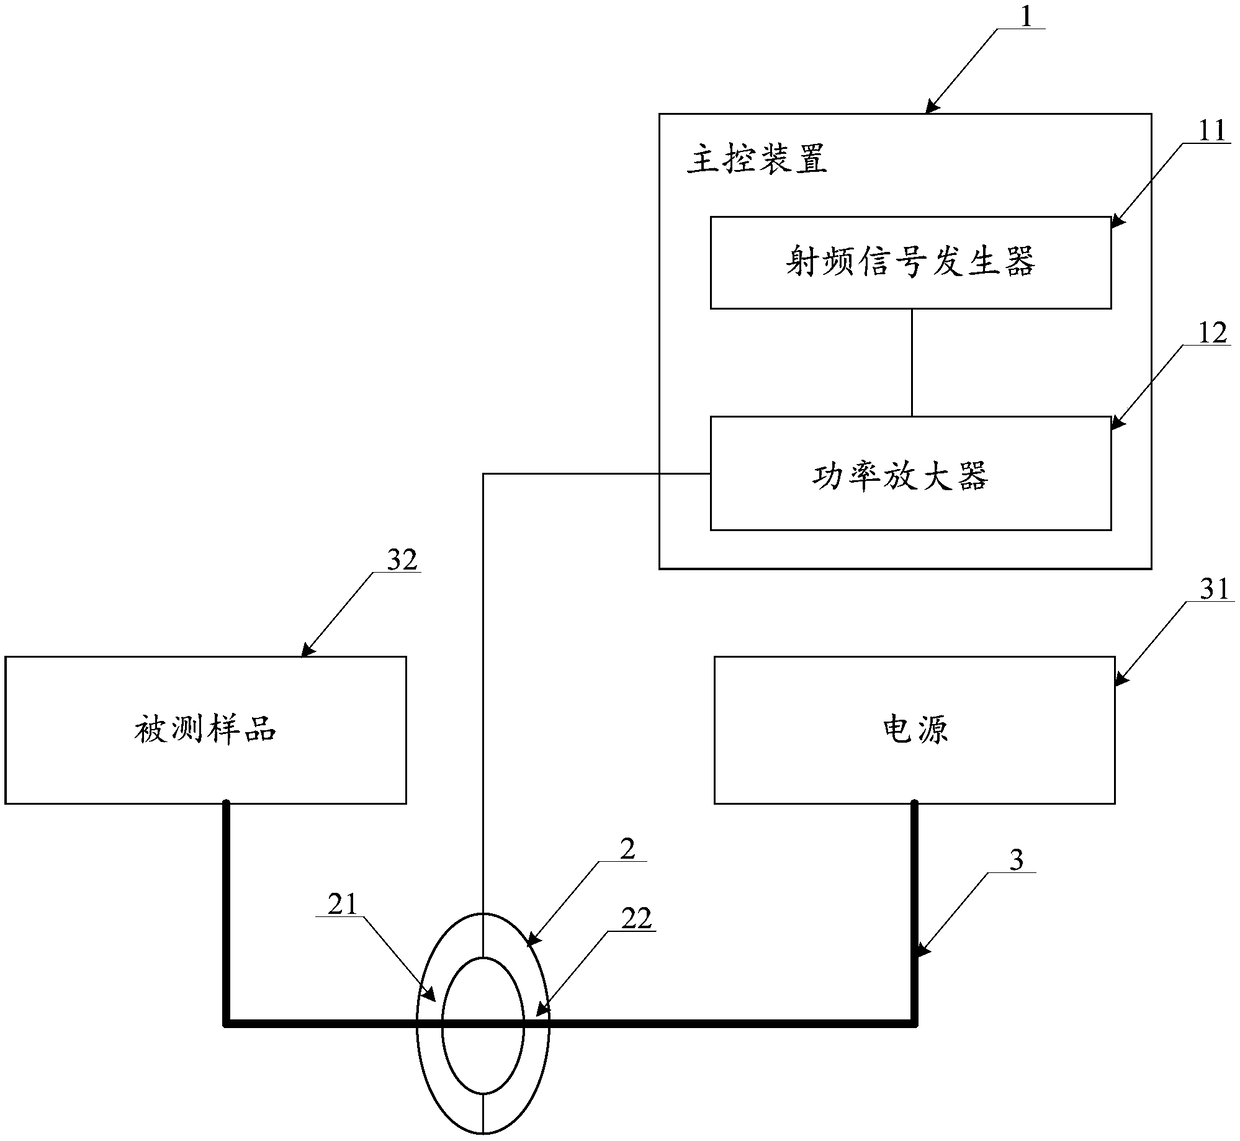 High current injection probe and electromagnetic compatibility test device